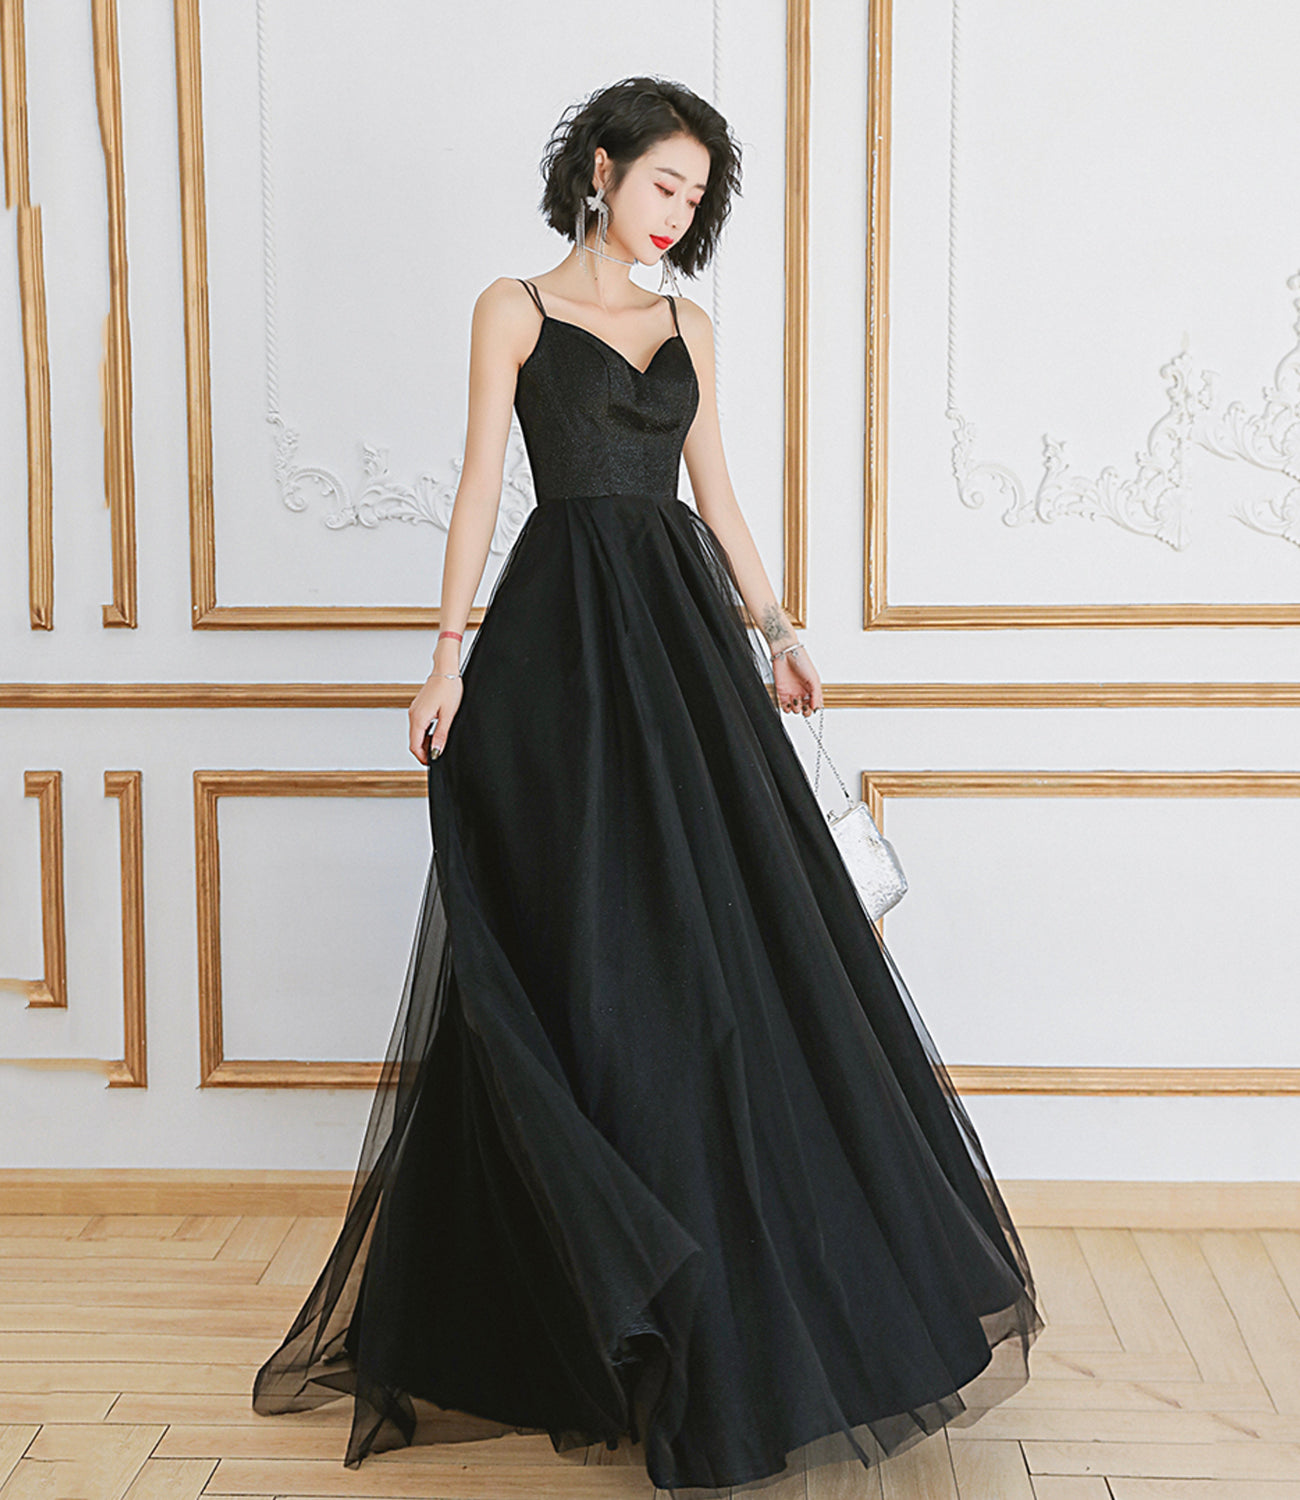 BLACK TULLE LONG A LINE PROM DRESS EVENING DRESS cg22314 – classygown